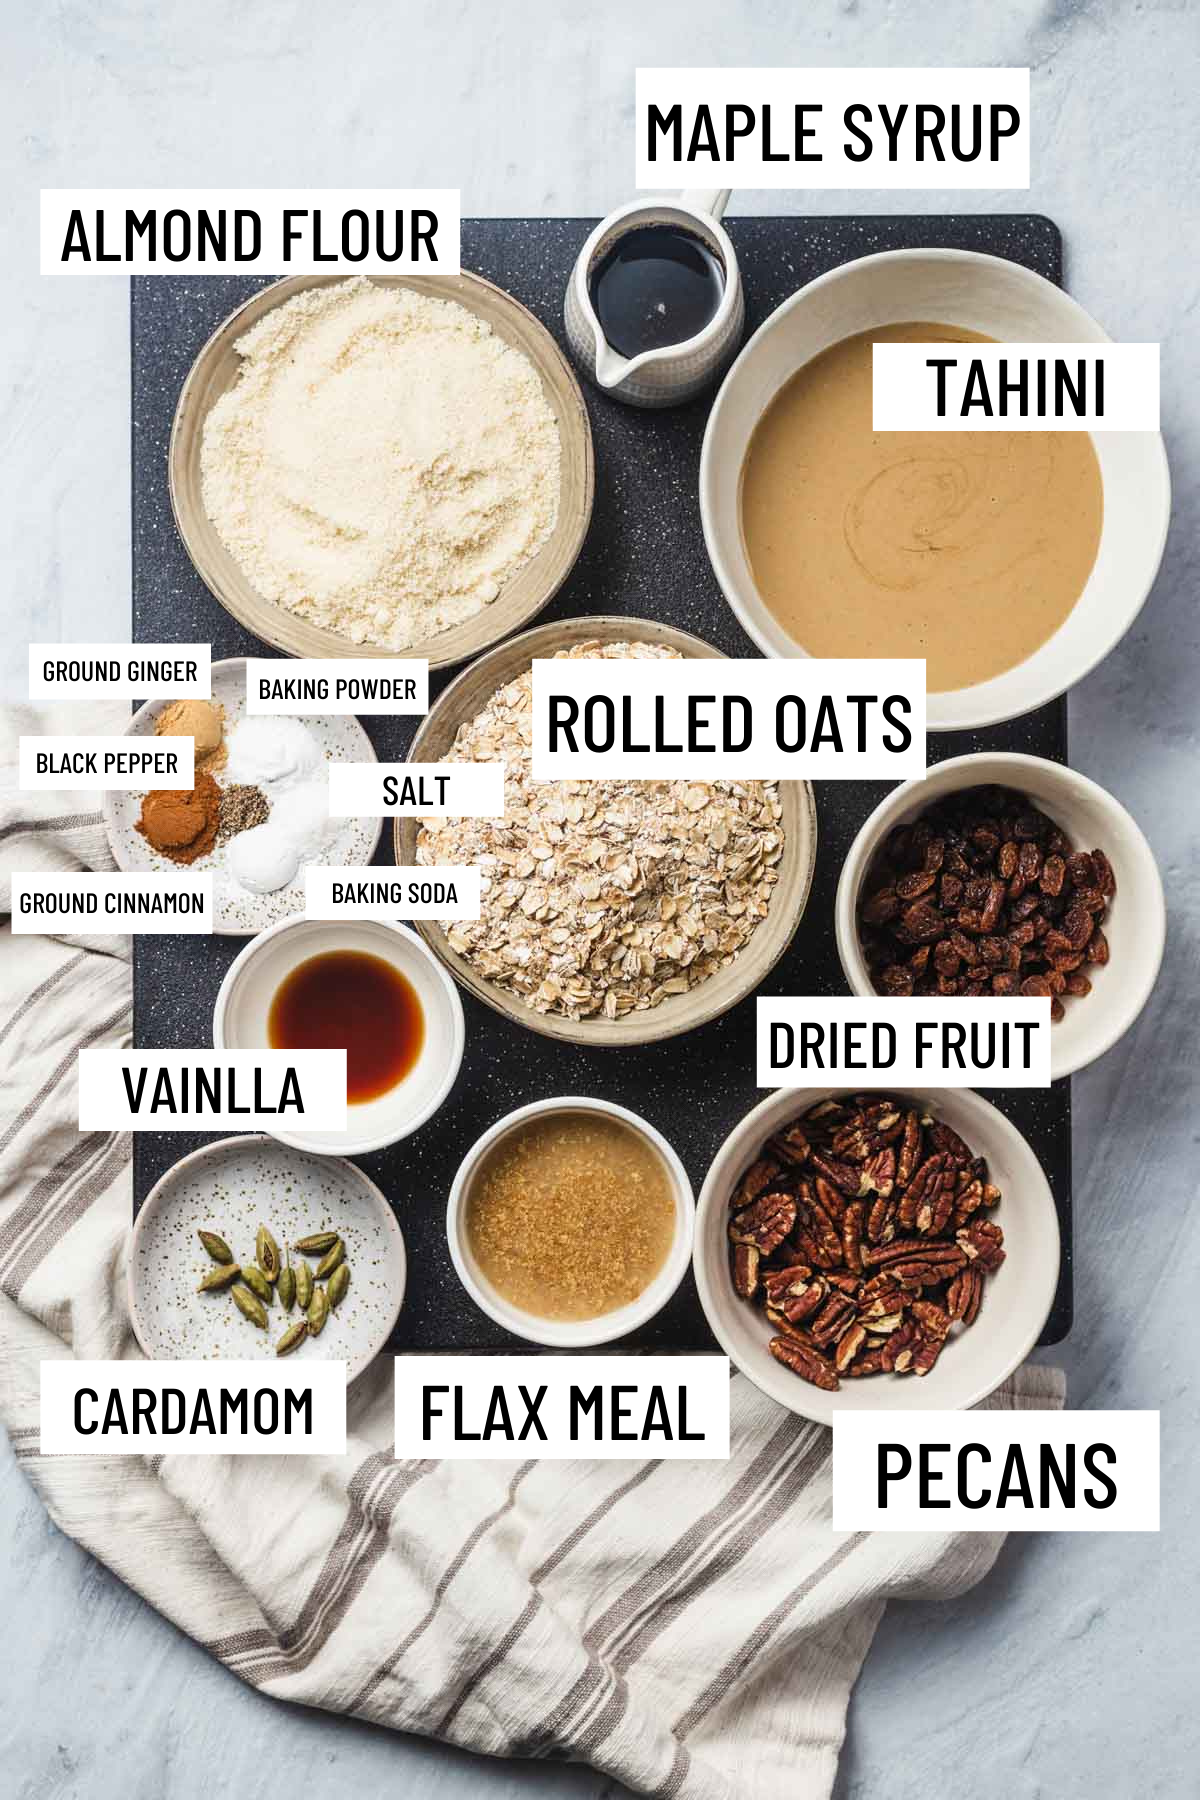 Birds eye view of portioned recipe ingredients including almond flour, maple syrup, tahini, ground ginger, black pepper, ground cinnamon, baking powder, salt, baking soda, vanilla, rolled oats, dried fruit, cardamom, flax meal, and pecans.